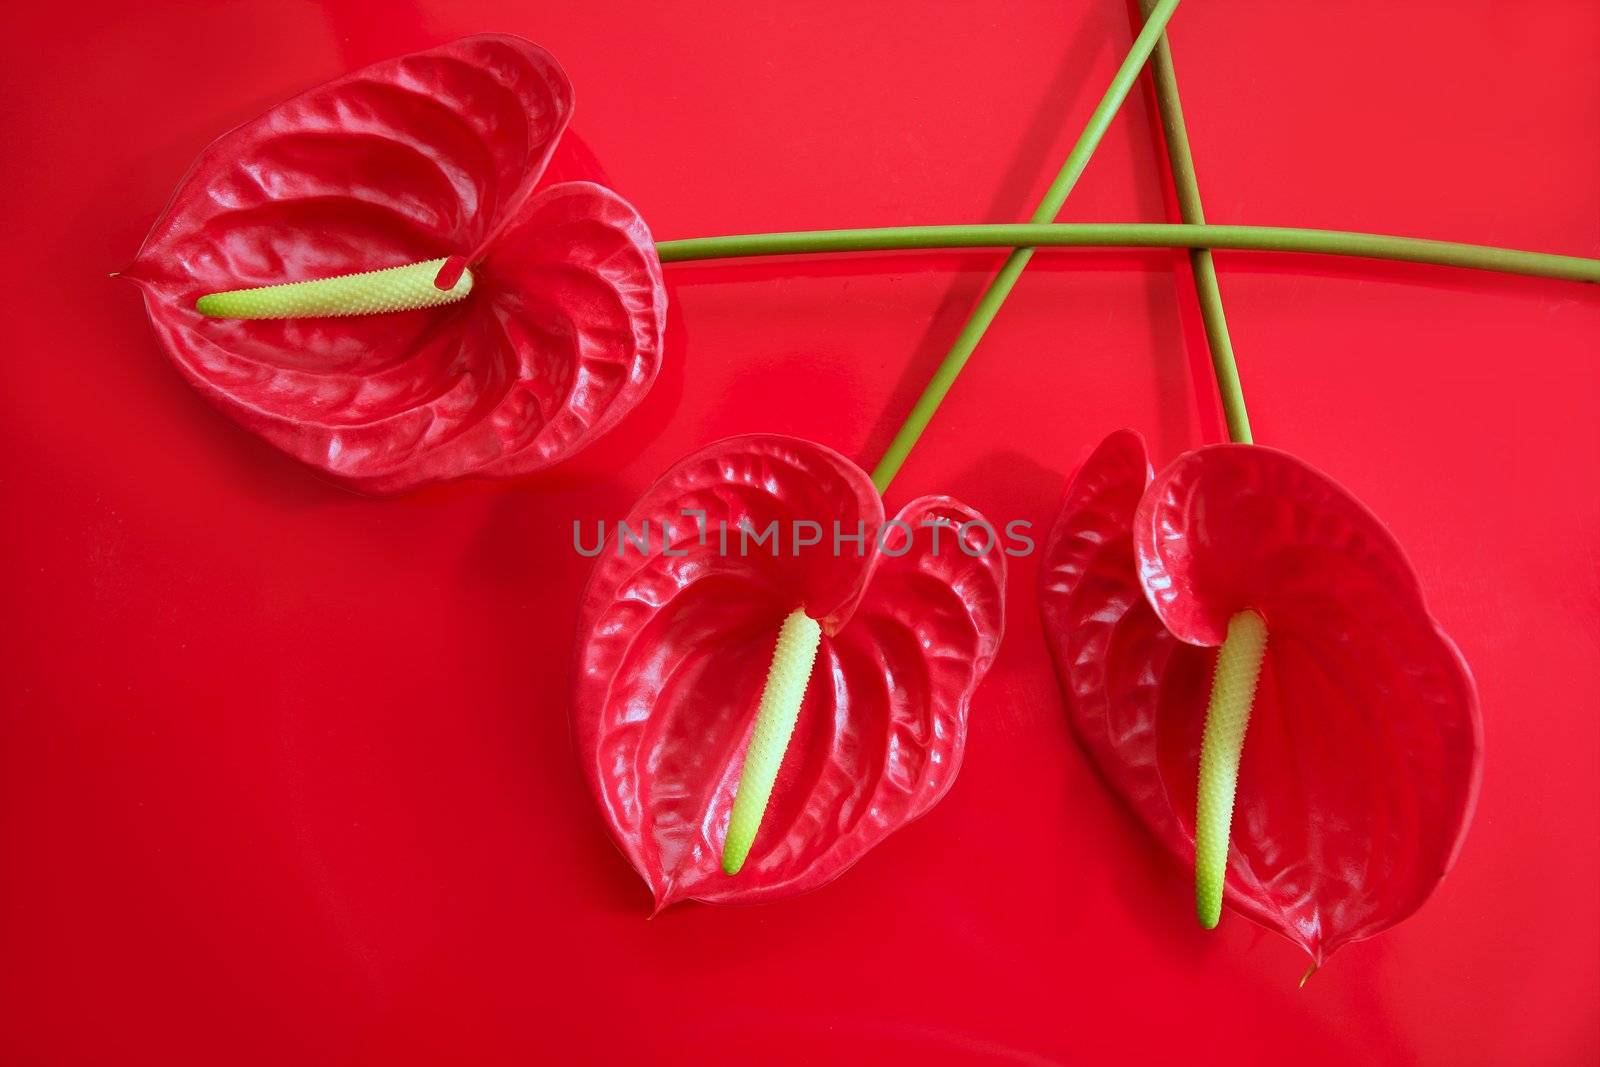 Anthurium exotic beautiful red and yellow flower still macro